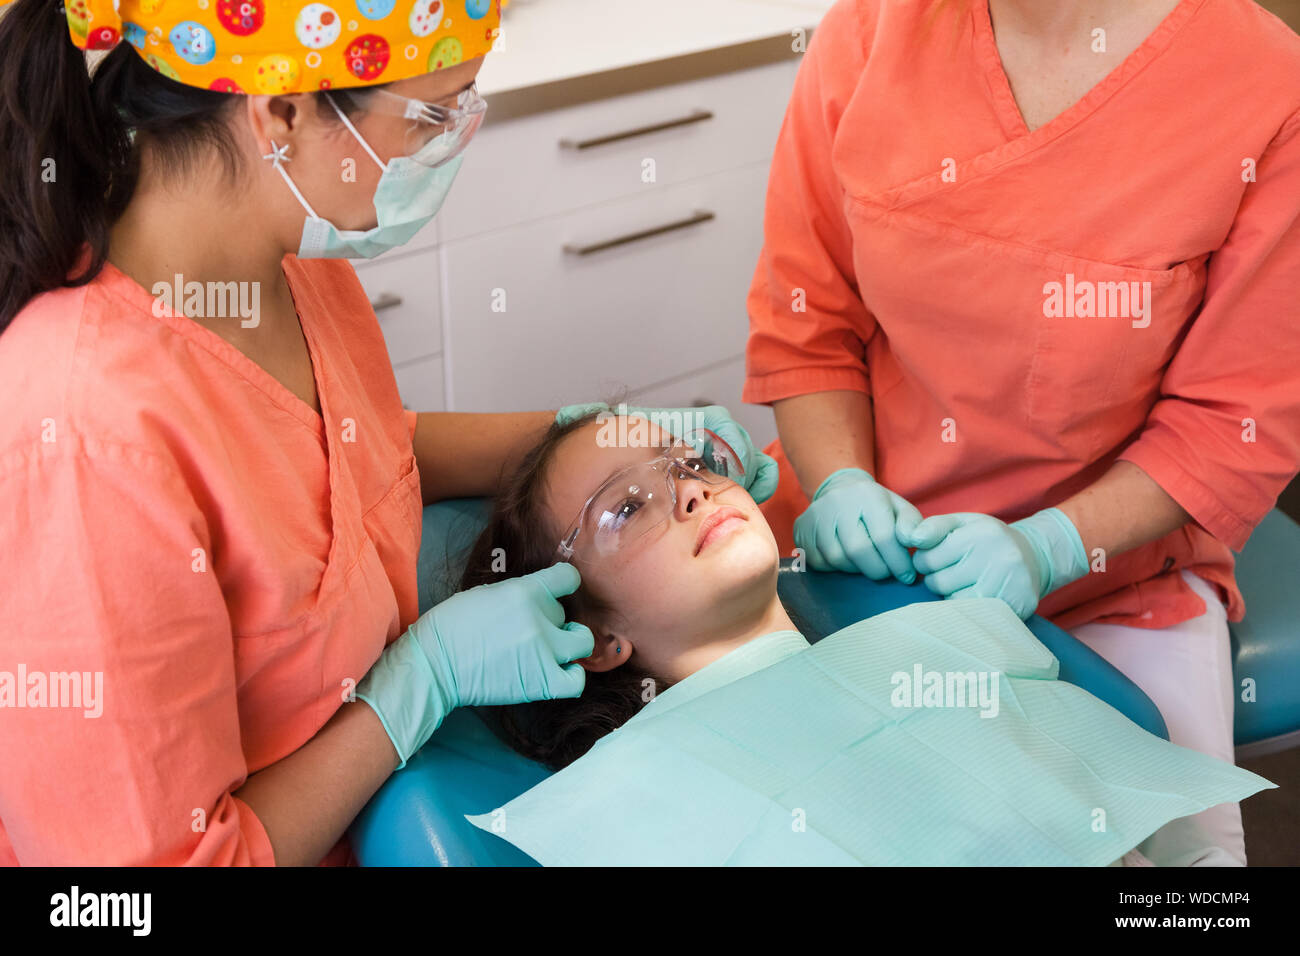 Pretty young girl a the dentist surgery for checkup with female dentist and assistant, putting on protective glasses Stock Photo